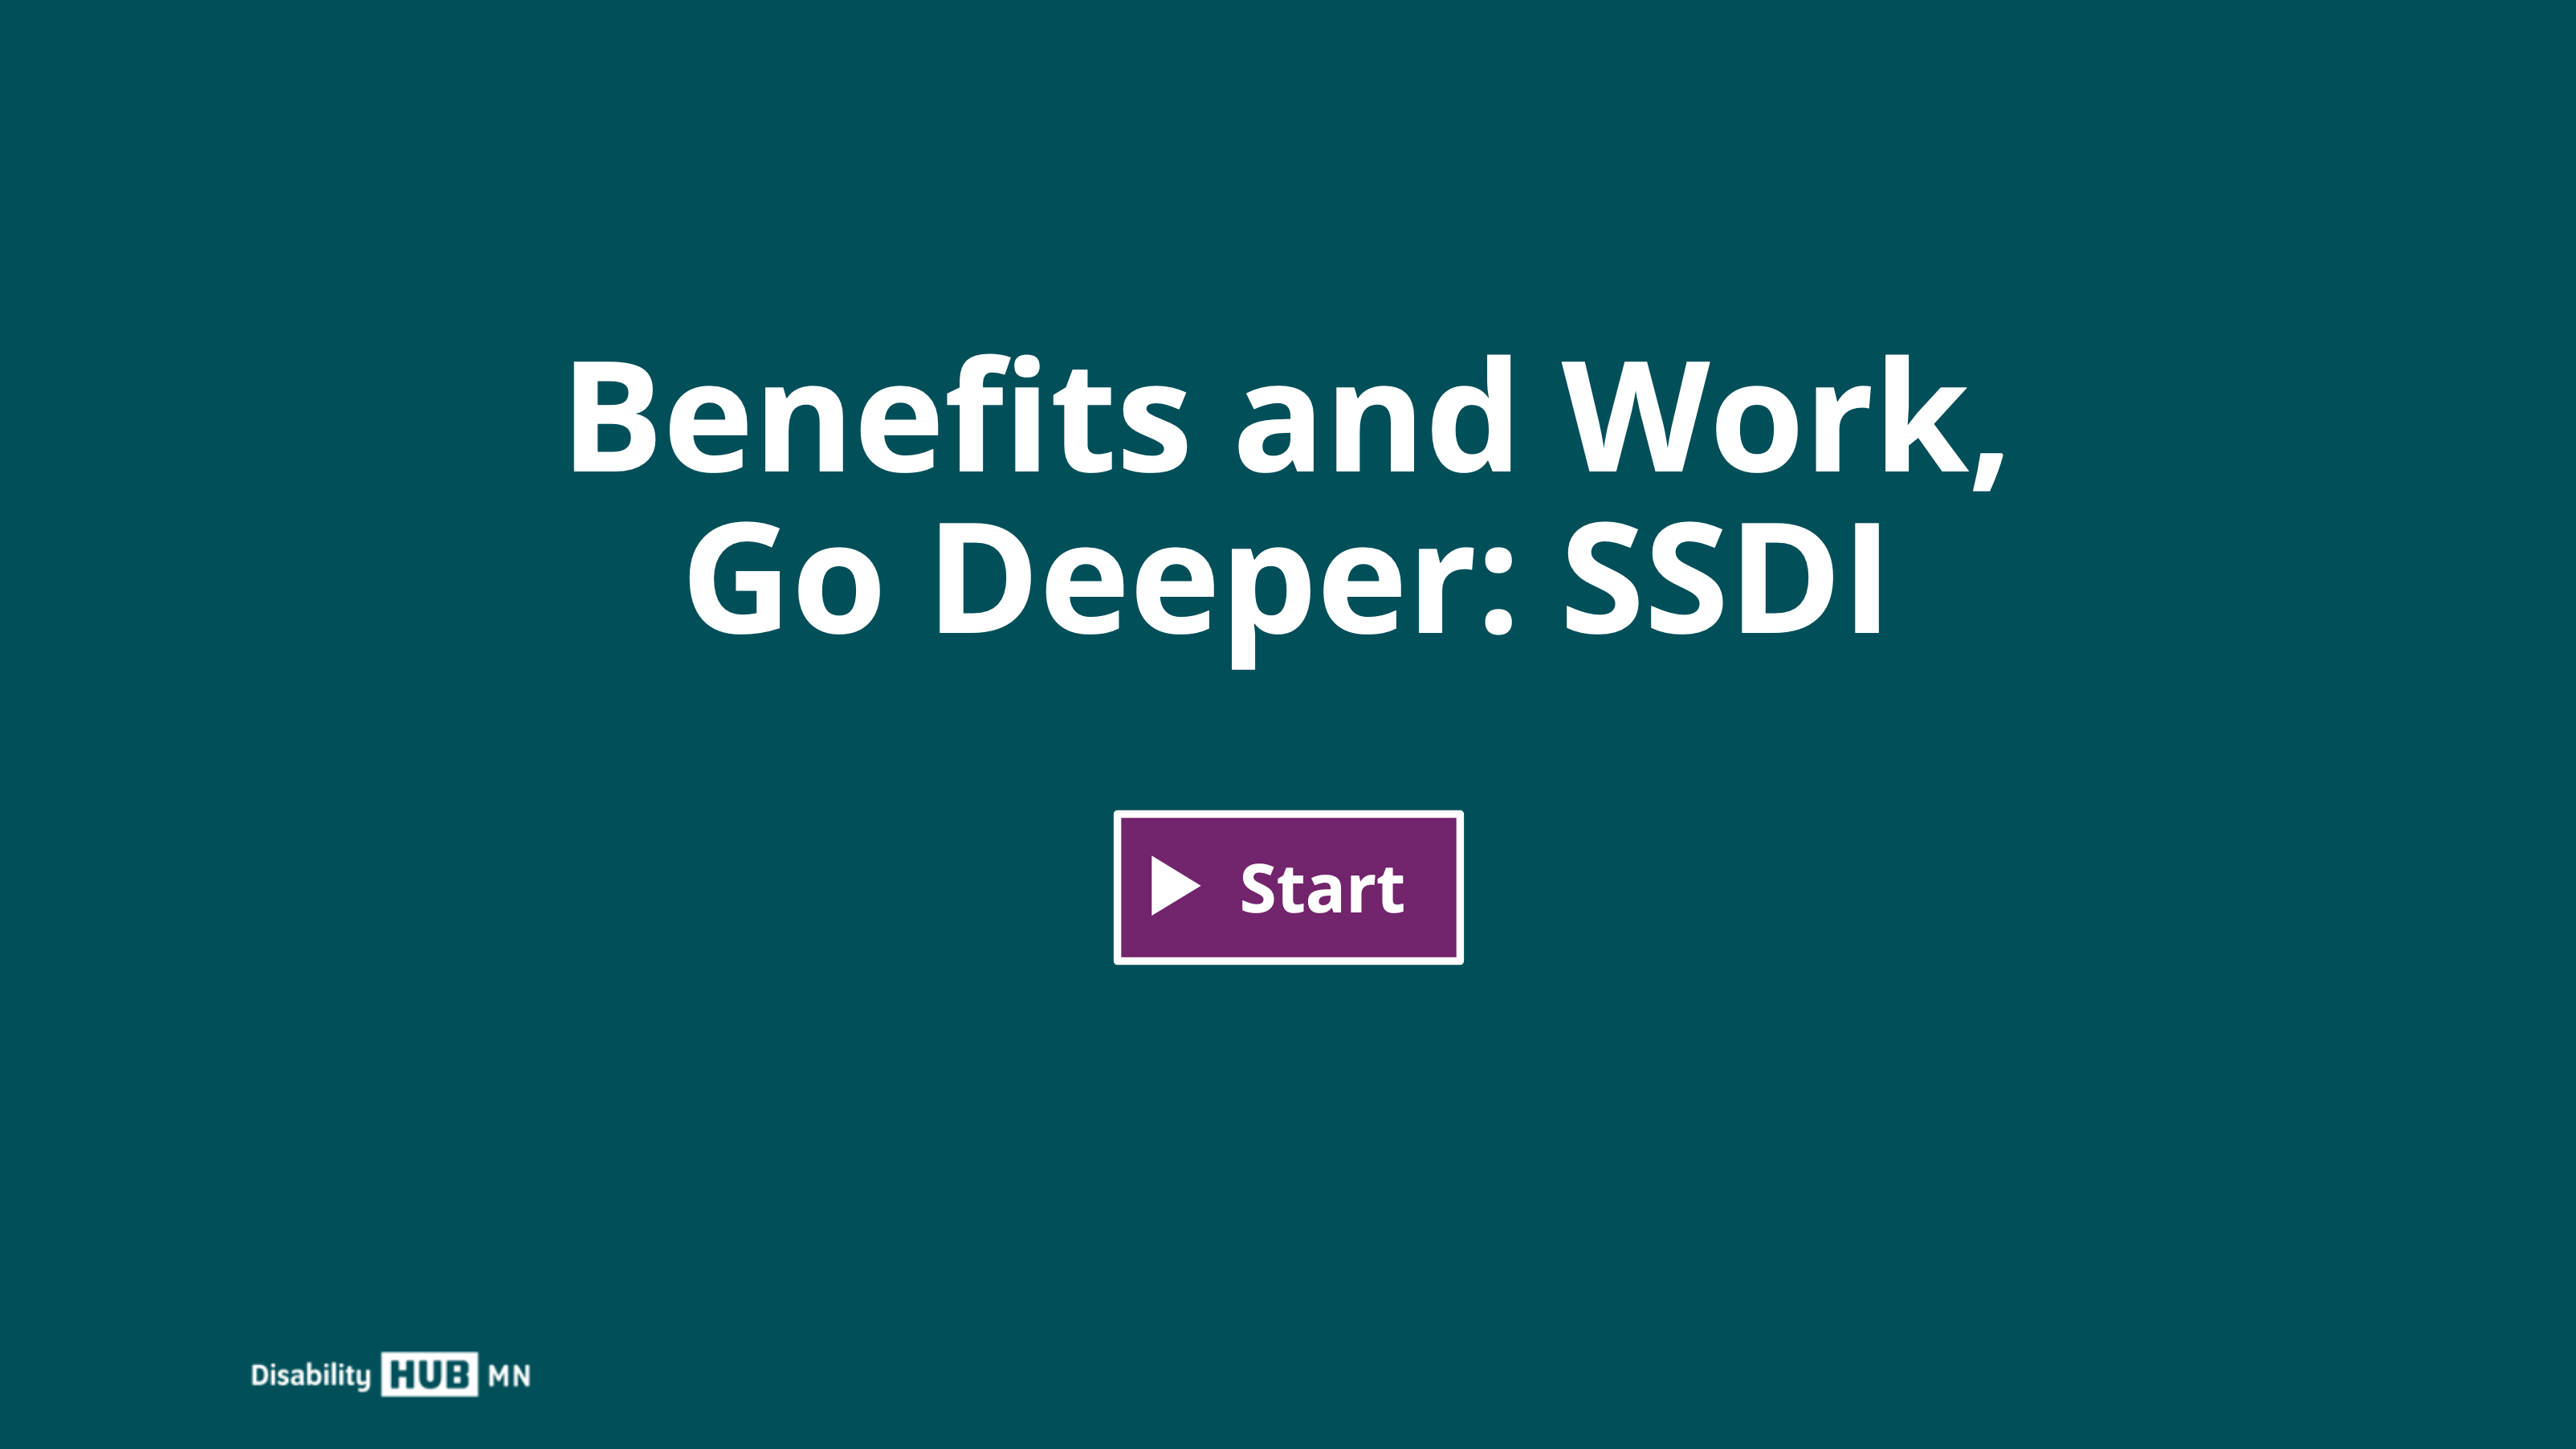 Click this image to begin the Benefits and Work, Go Deeper: SSDI e-learning